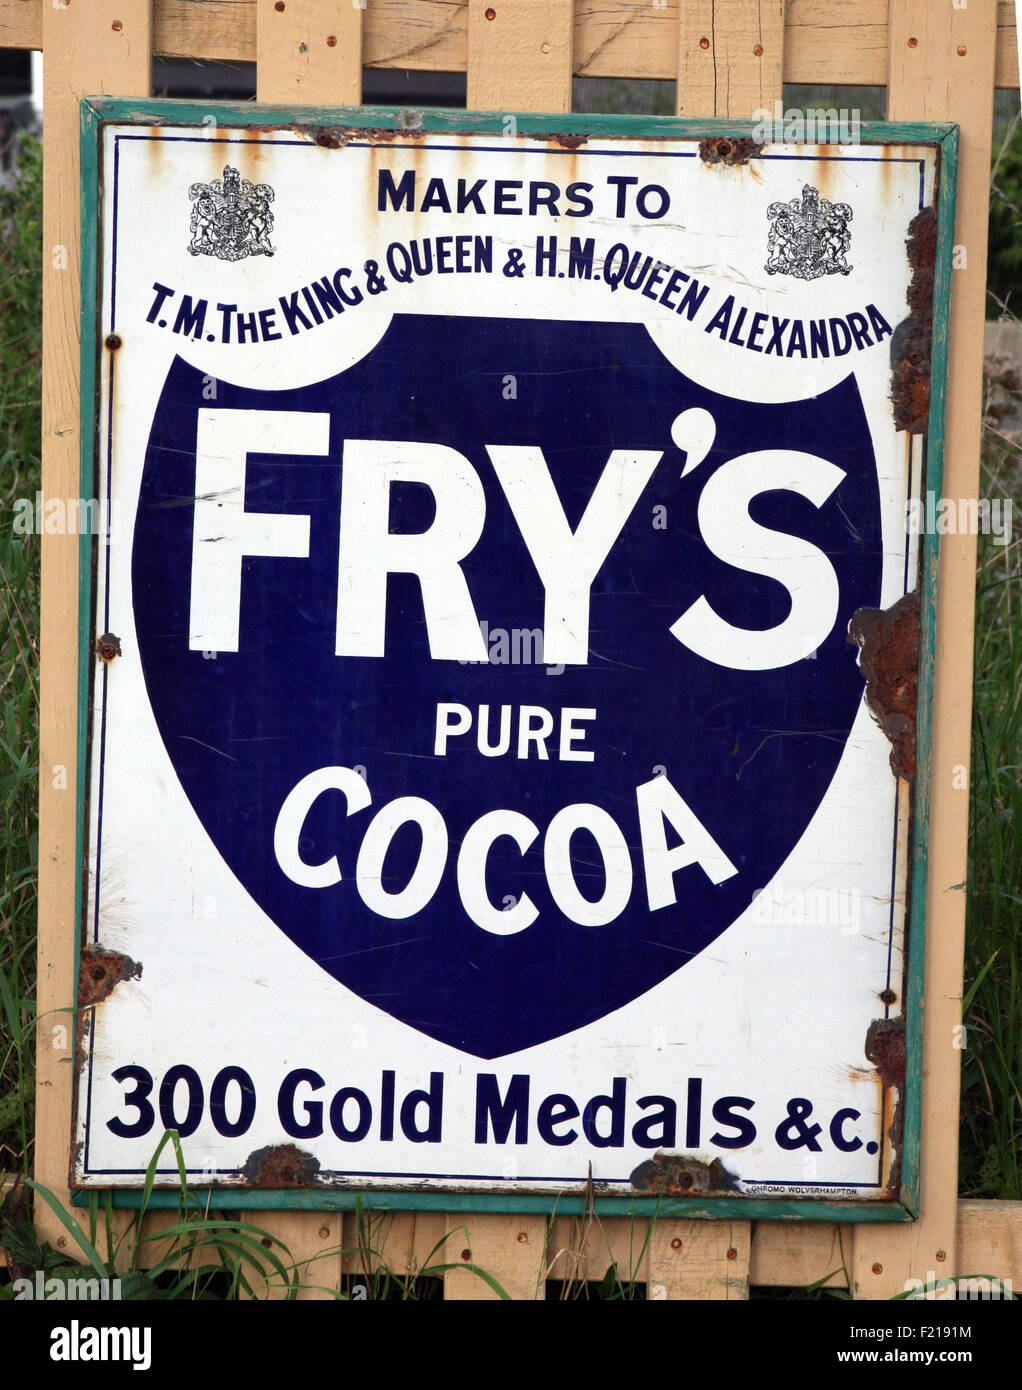 Fry's Cocoa poster Banque D'Images